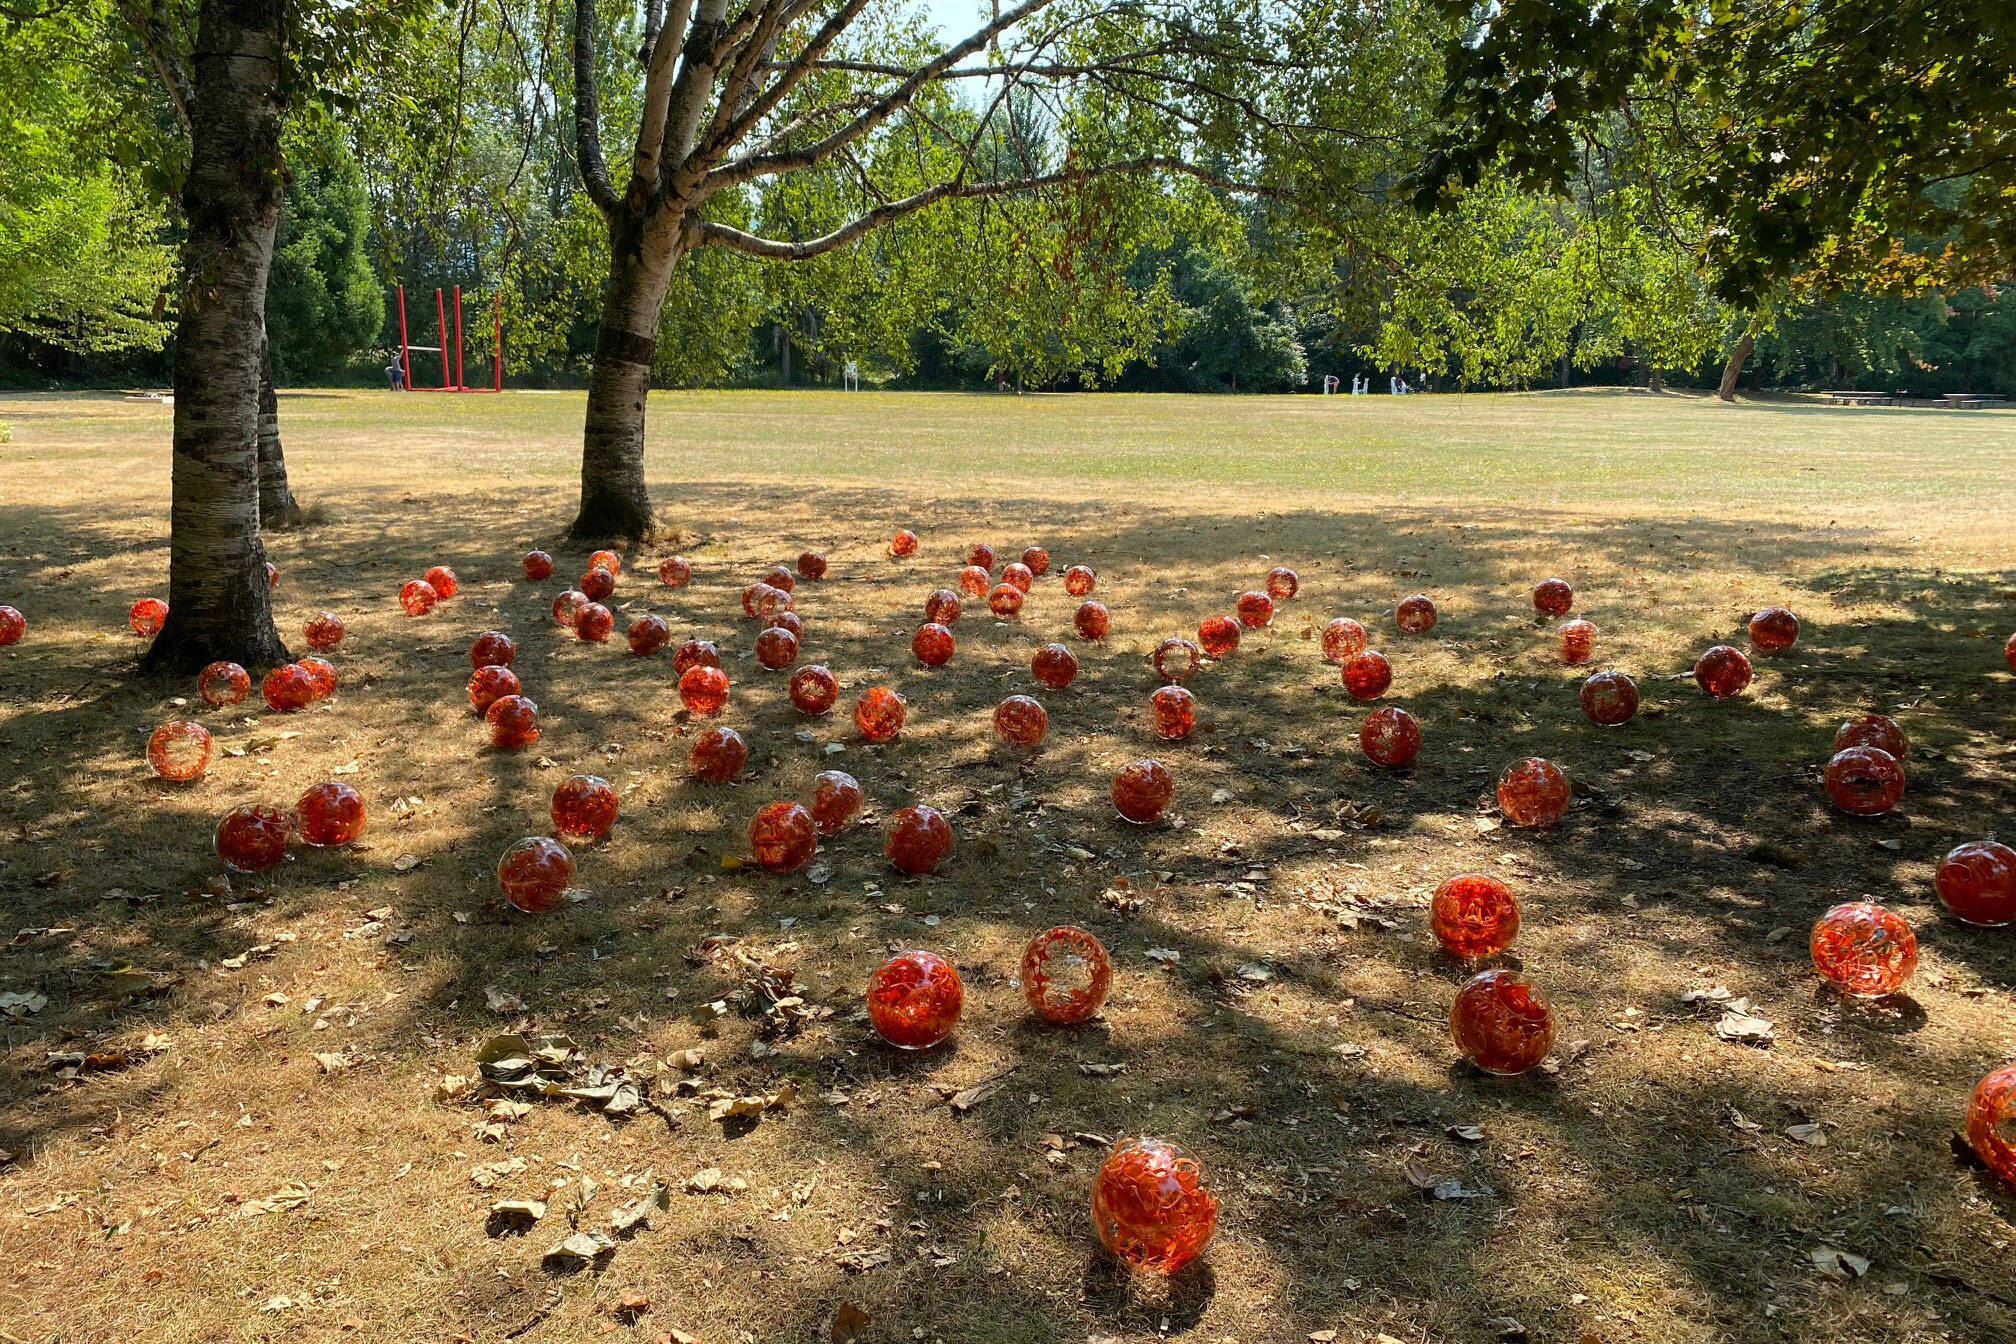 Art In The Park installation (courtesy of Friends of Lake Sammamish State Park)